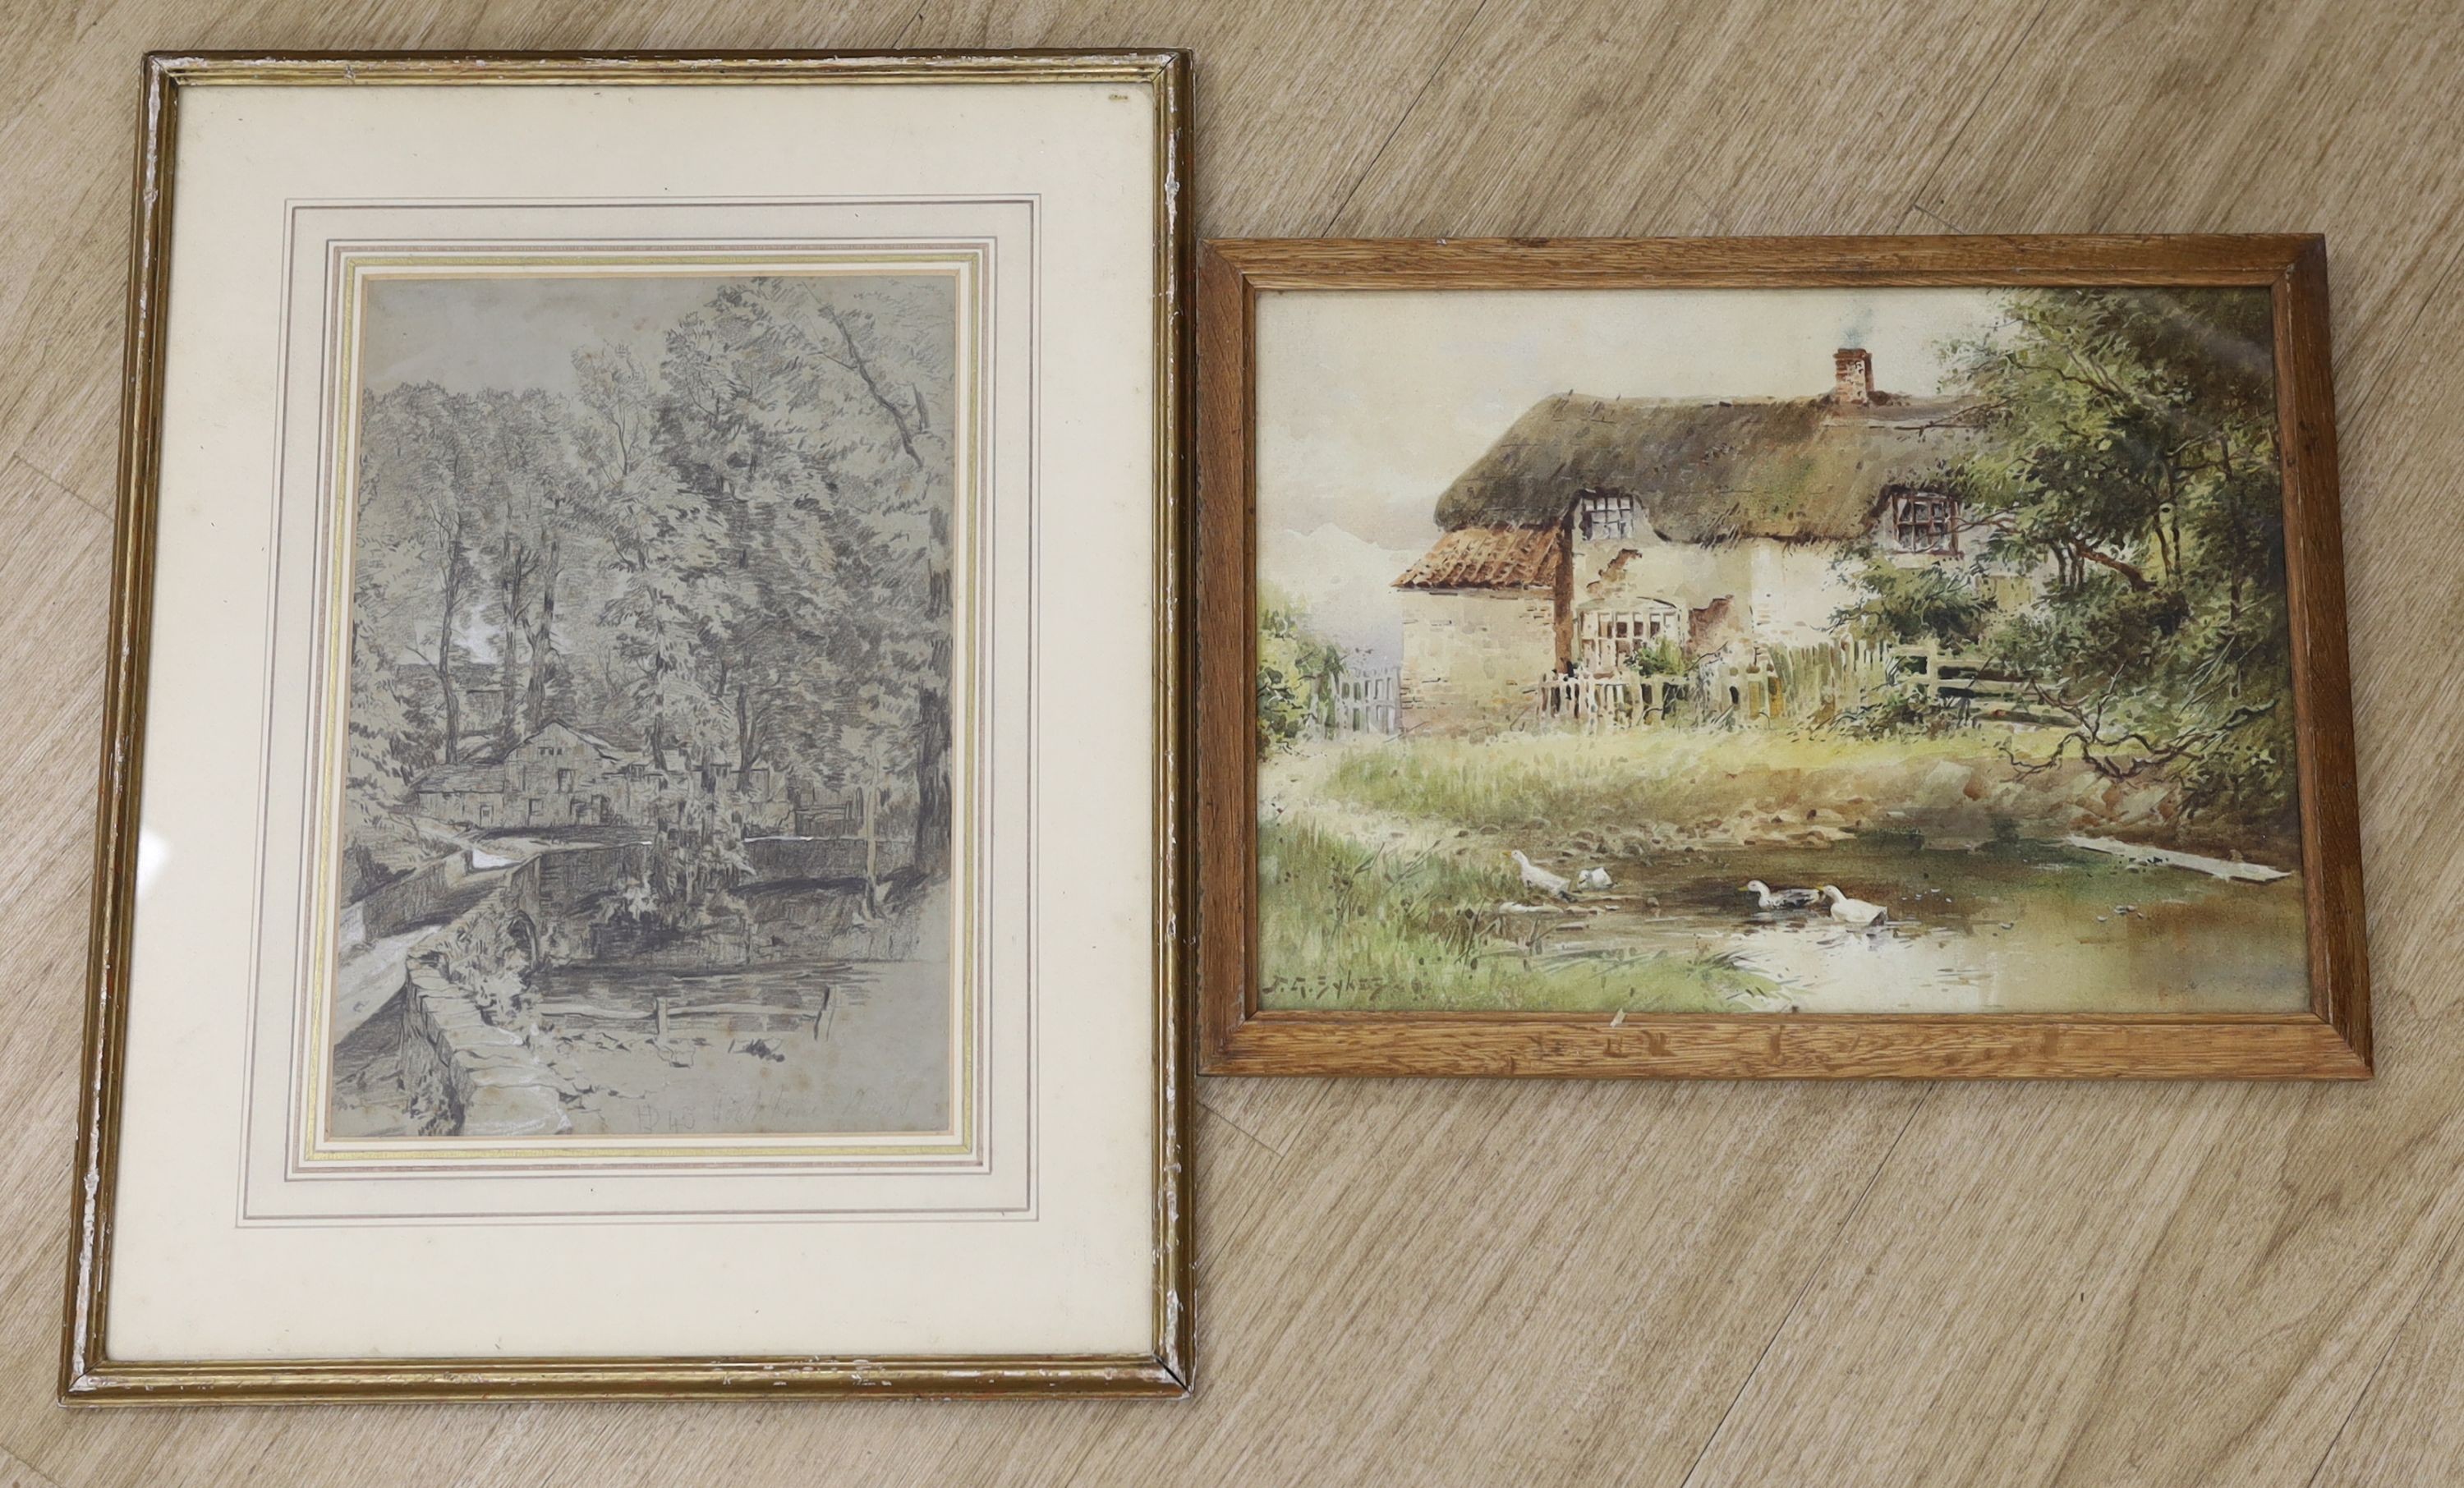 John Gutteridge Sykes (1866-1941), watercolour, Ducks with thatched cottage, signed, 27 x 37cm and a pencil sketch of a Welsh village, 32 x 22cm